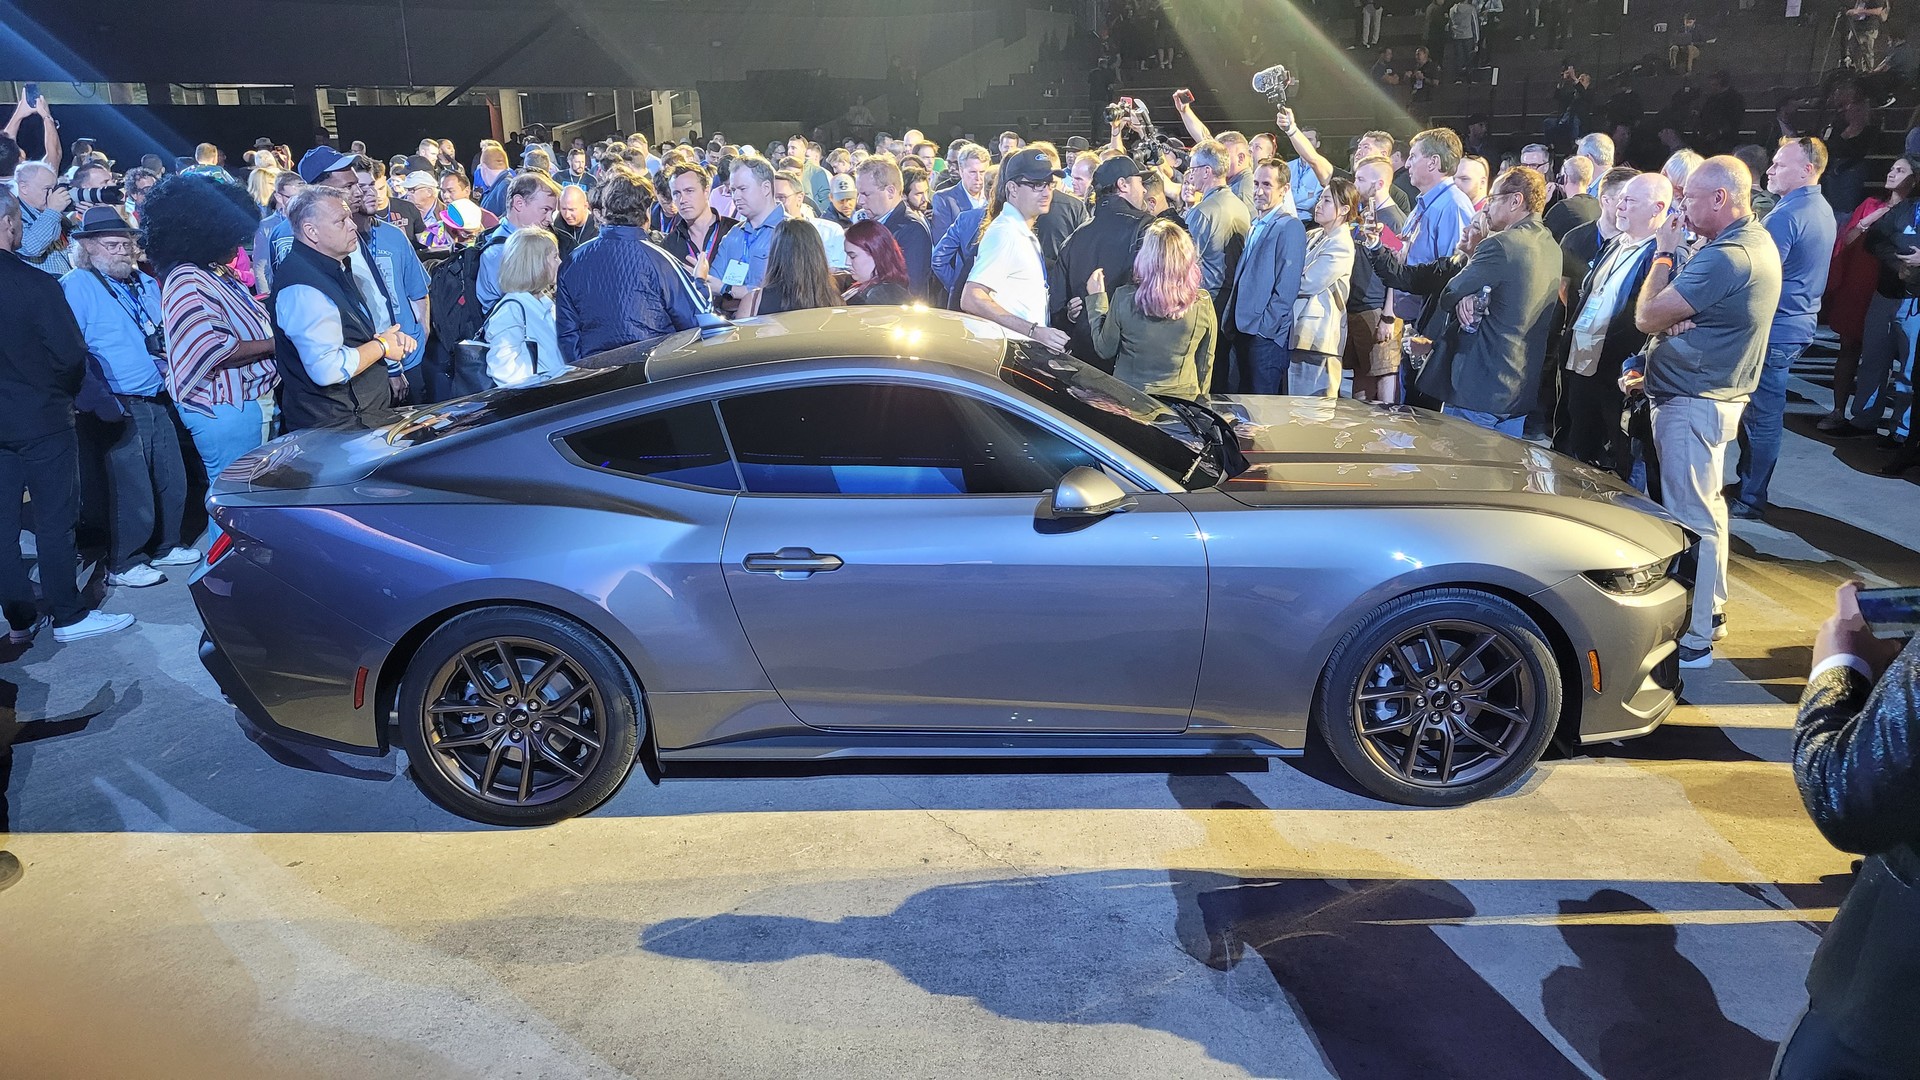 S650 Mustang S650 pics from reveal night and showfloor of 2022 Detroit Auto Show 2022-NAIAS-321